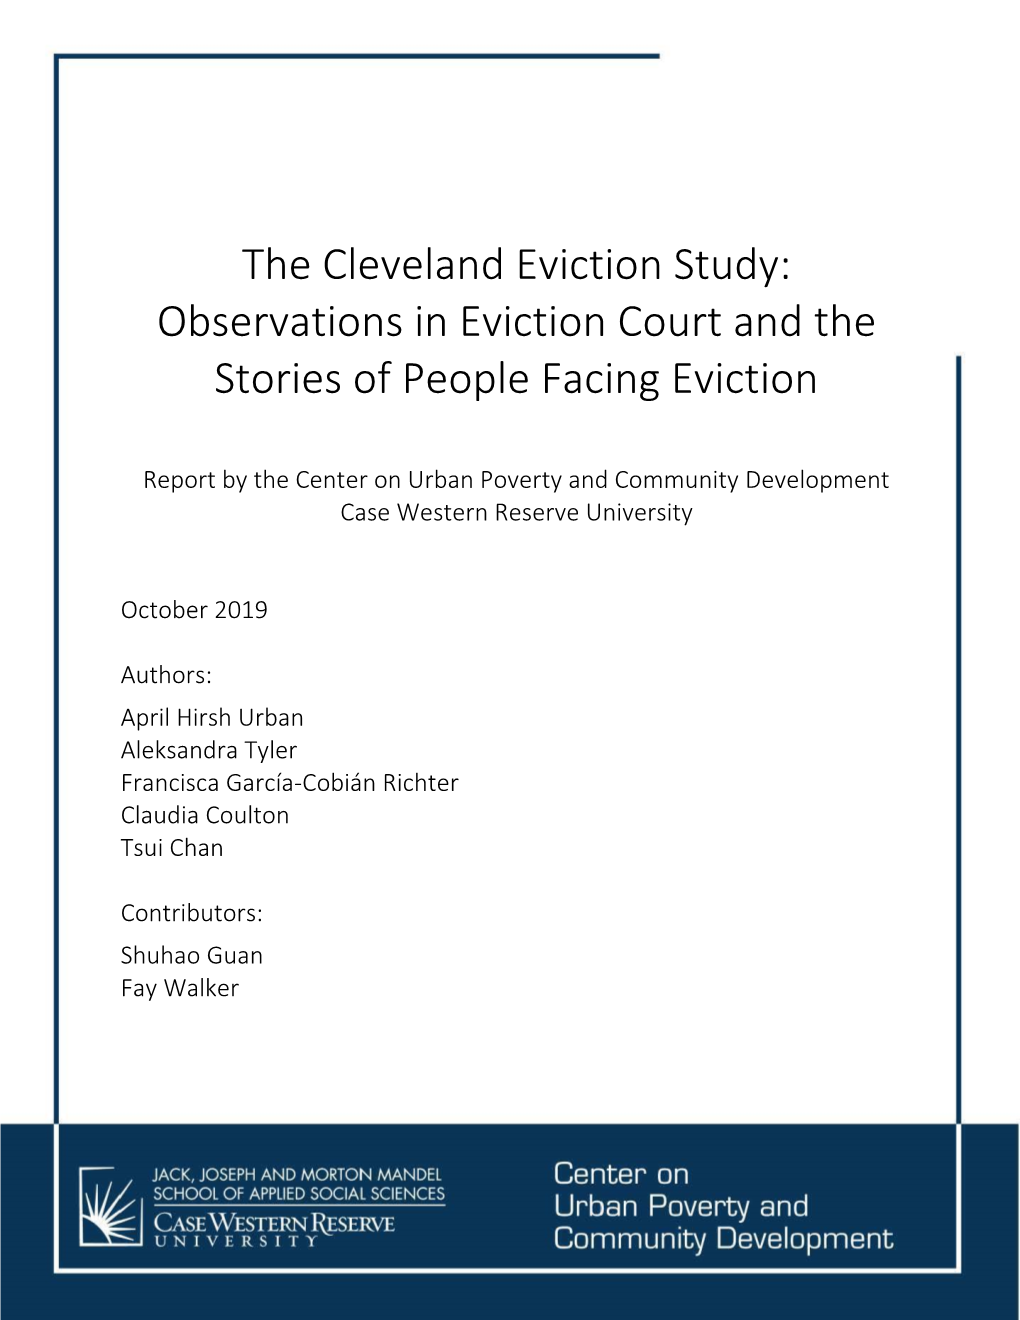 The Cleveland Eviction Study: Observations in Eviction Court and the Stories of People Facing Eviction